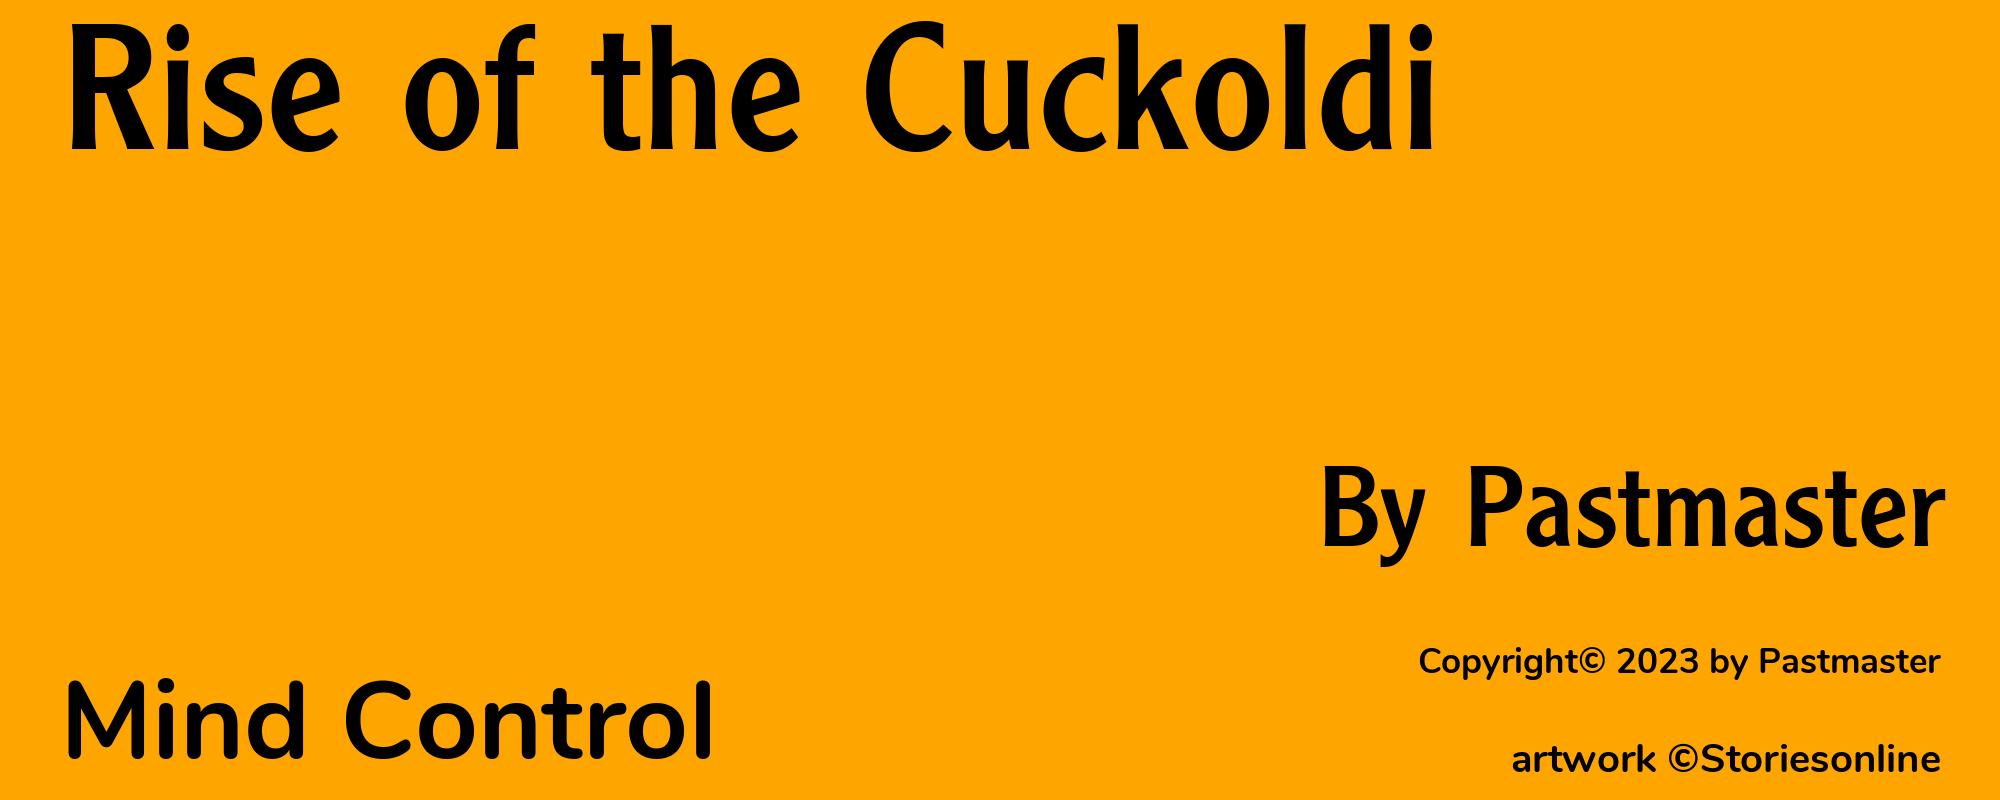 Rise of the Cuckoldi - Cover